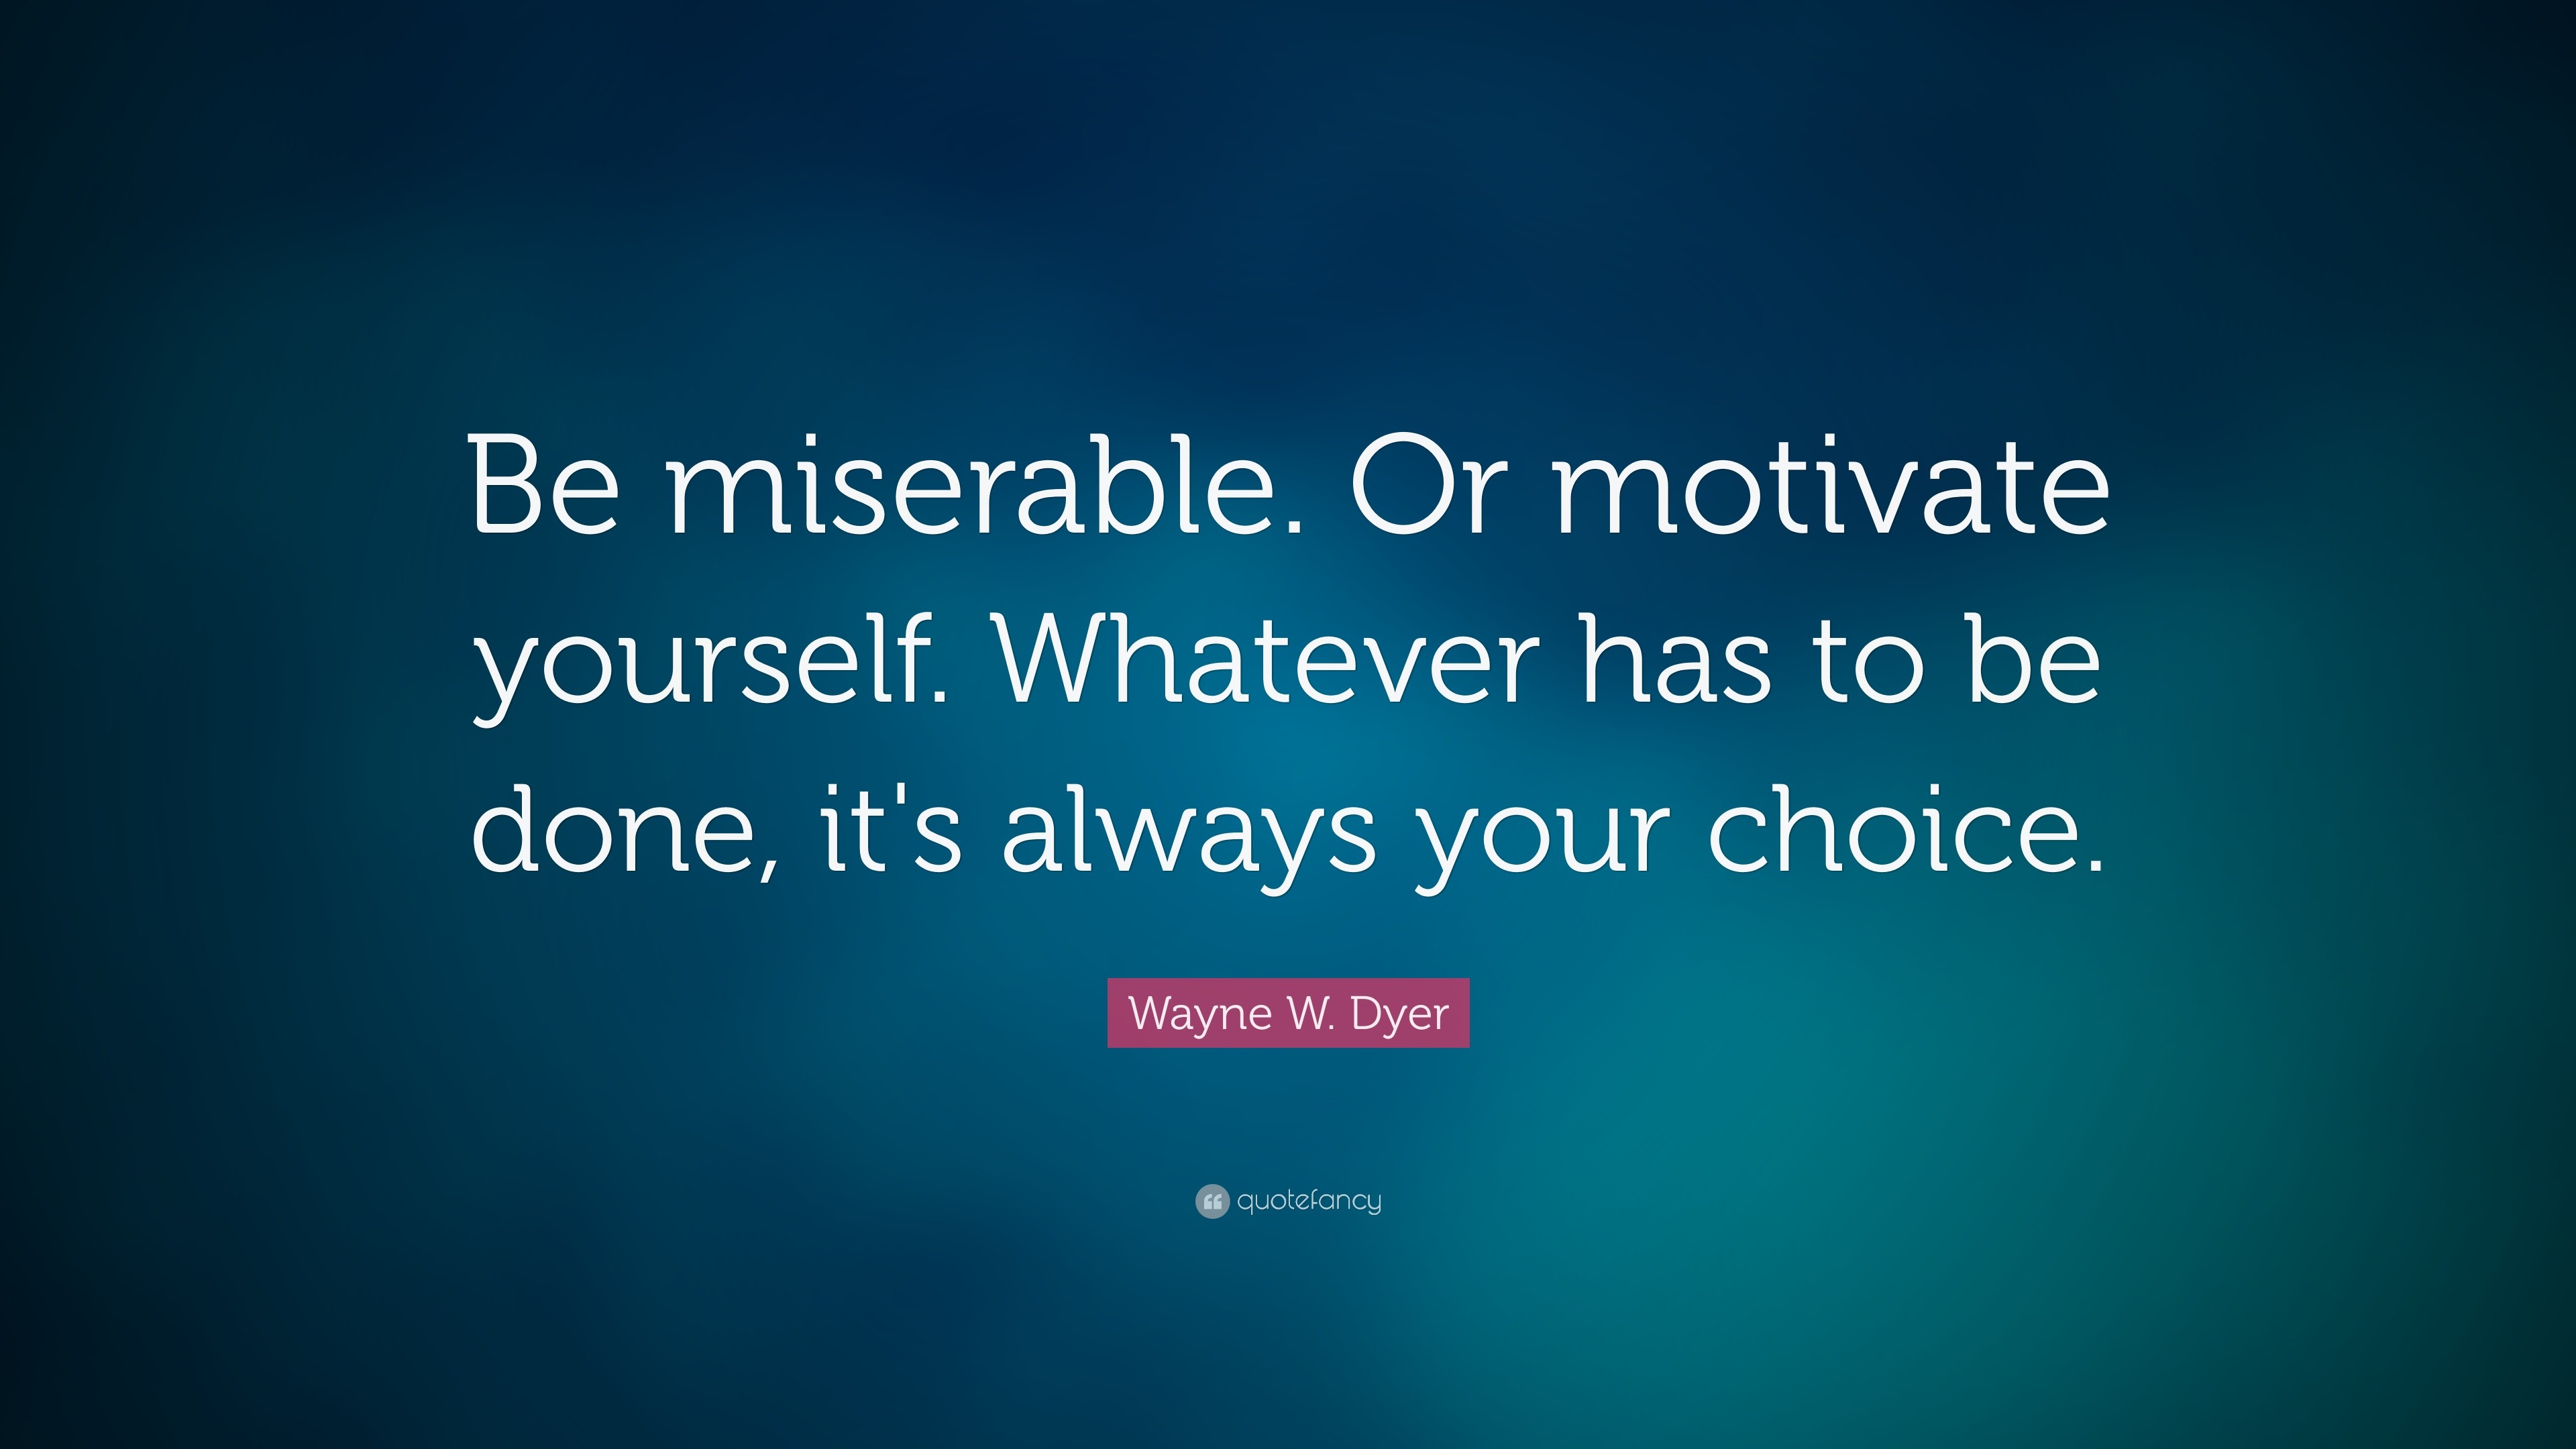 Wayne W. Dyer Quote: “Be miserable. Or motivate yourself ...